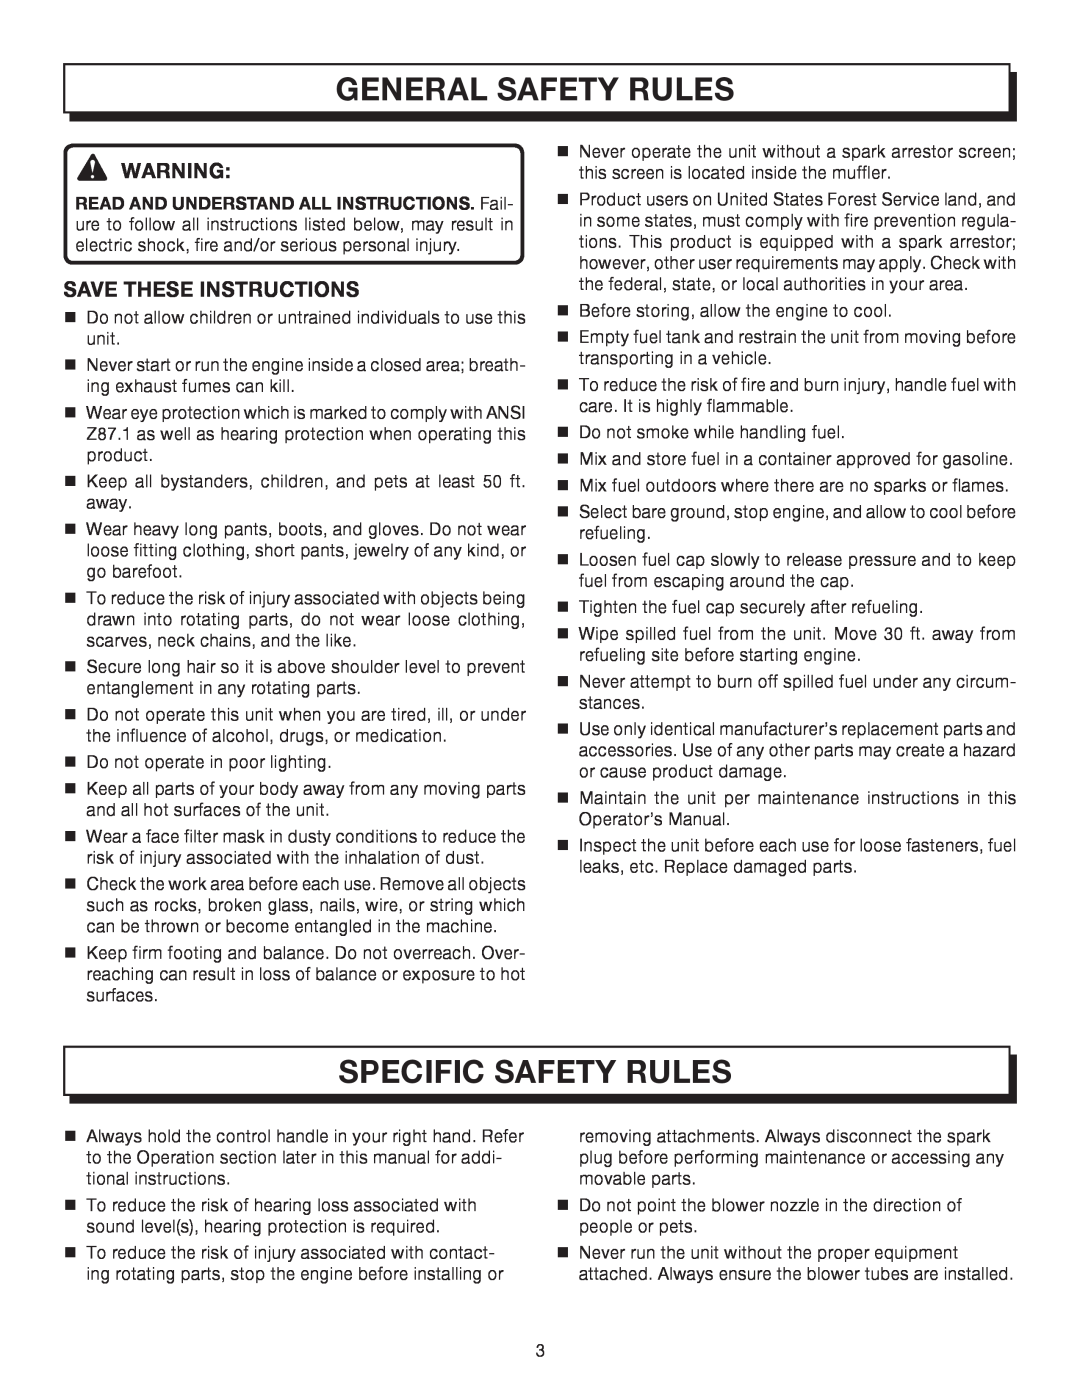 Homelite UT08072, UT08572 manual General Safety Rules, Specific Safety Rules, Save These Instructions 